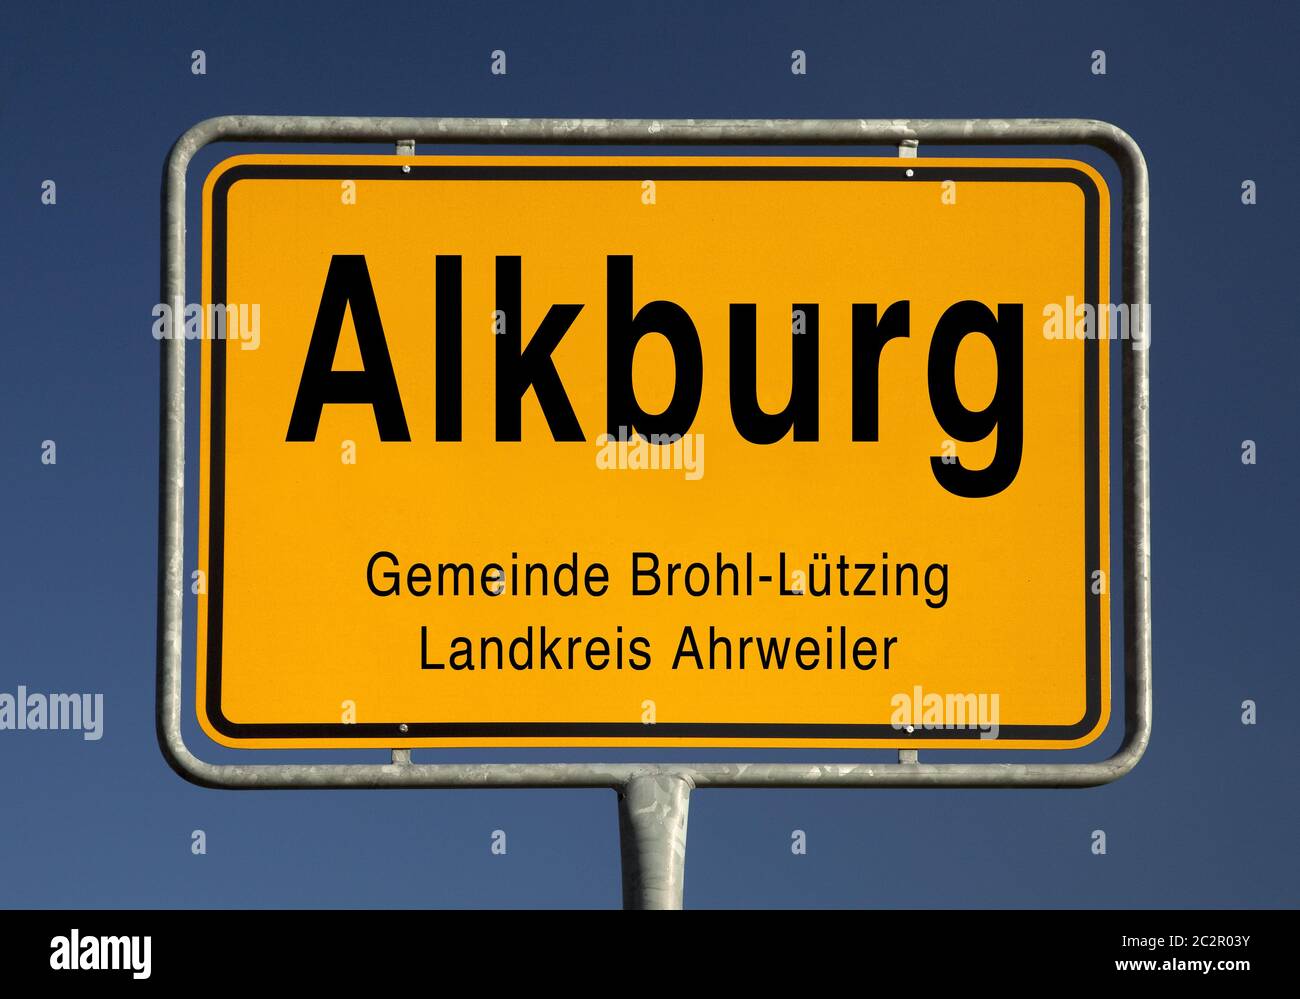 Town sign of Alkburg in the local community Brohl-Luetzing, Rhineland-Palatinate, Germany, Europe Stock Photo